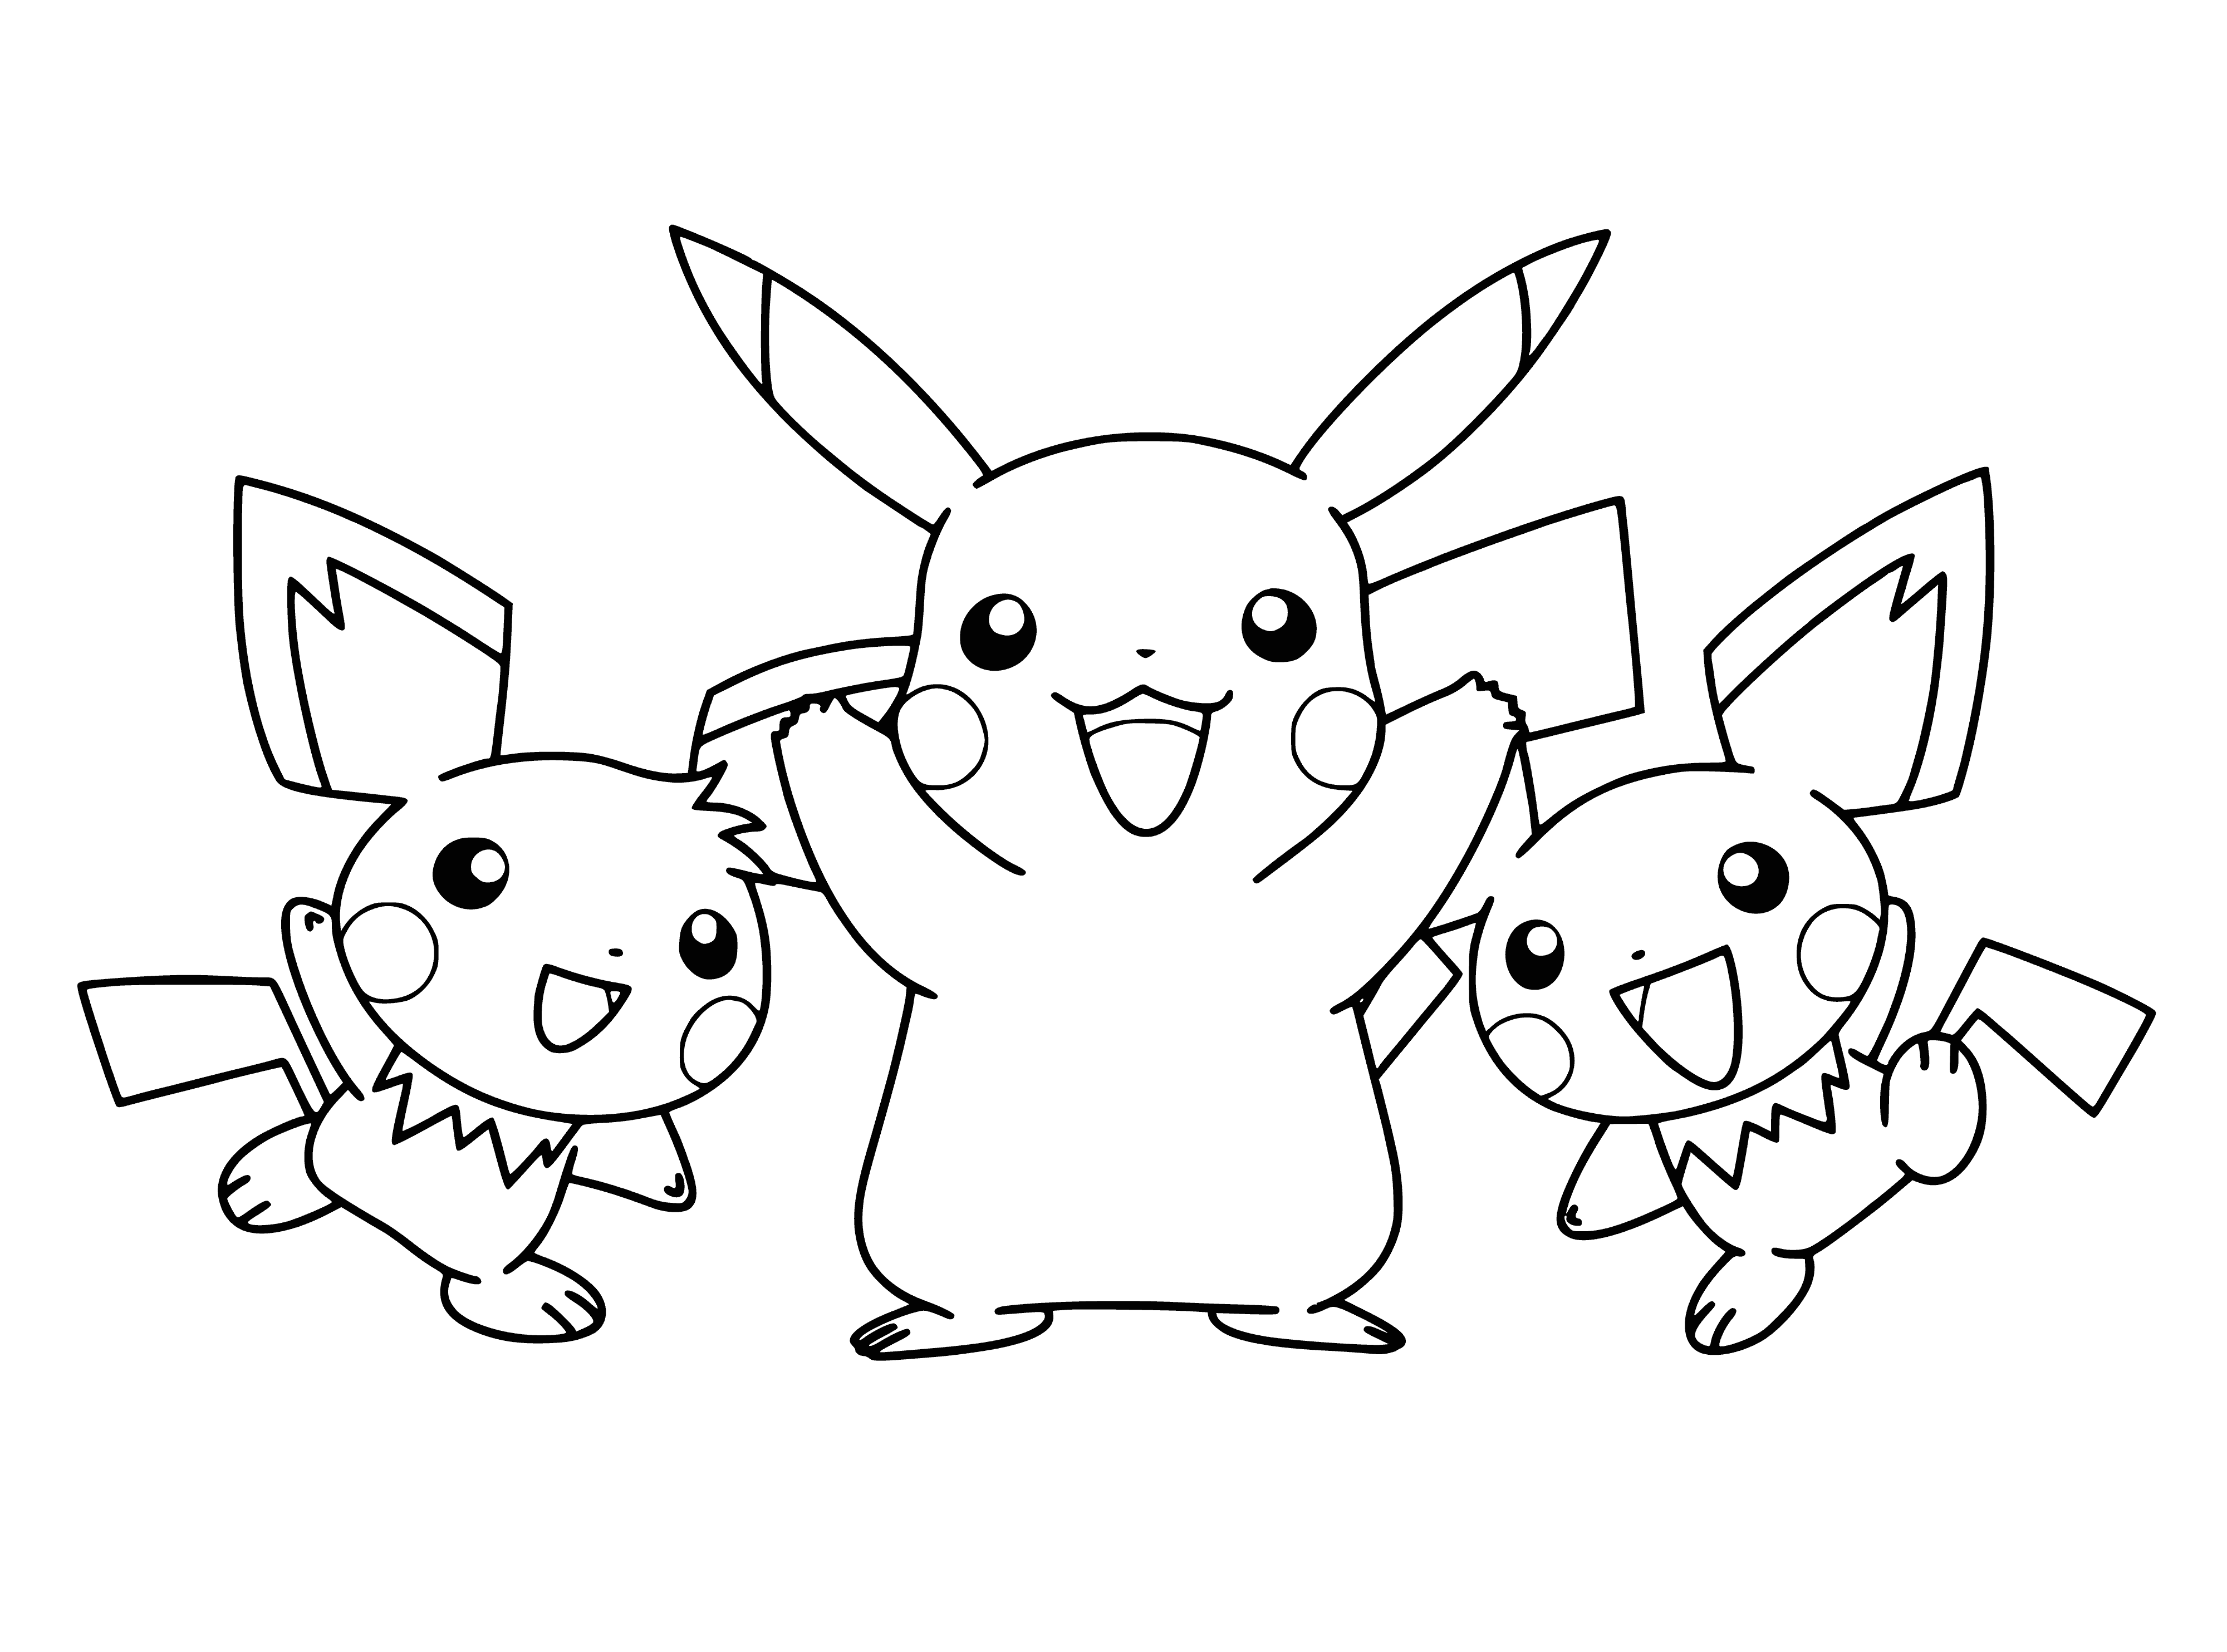 Pokemon and Pikachu coloring page